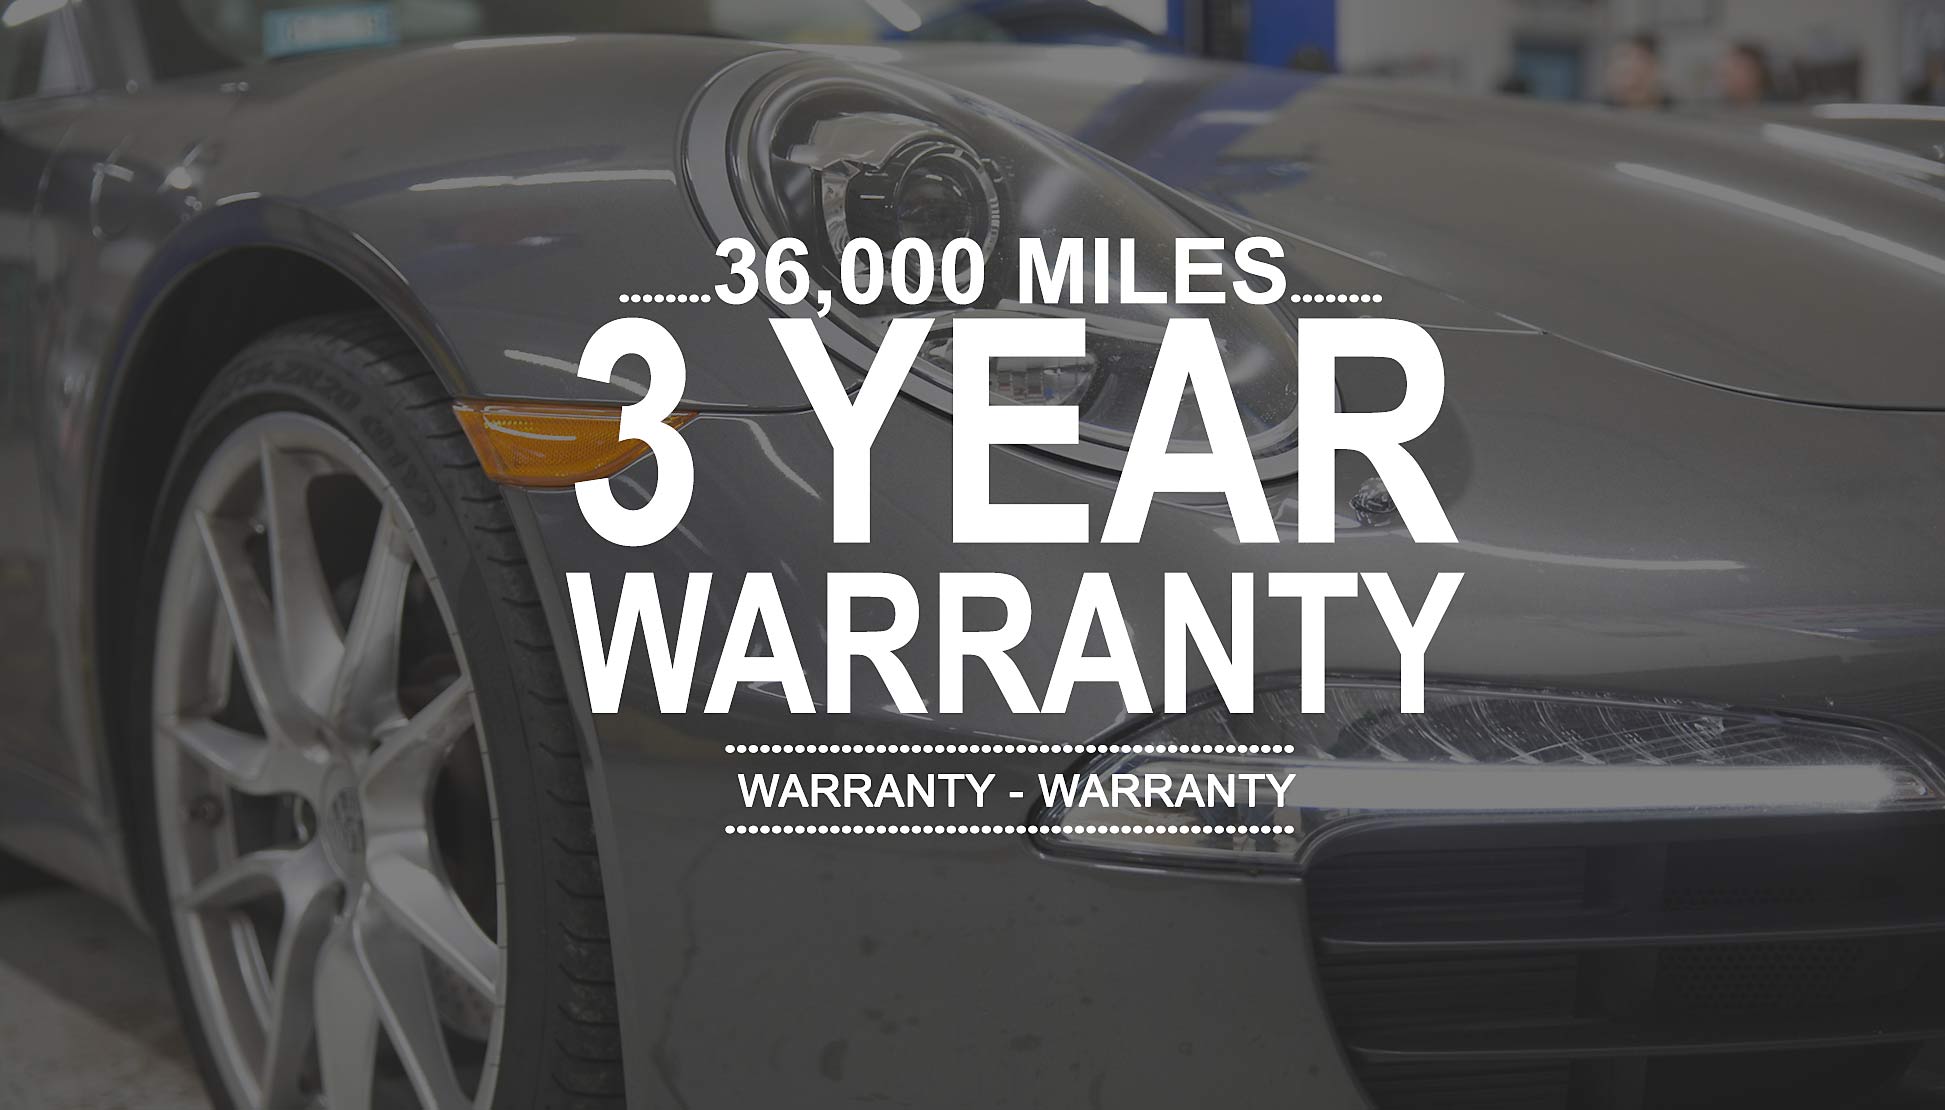 VFC Engineering Offers a 3 year, 36,000 mile warranty on its auto repairs. | VFC Engineering Chicago IL